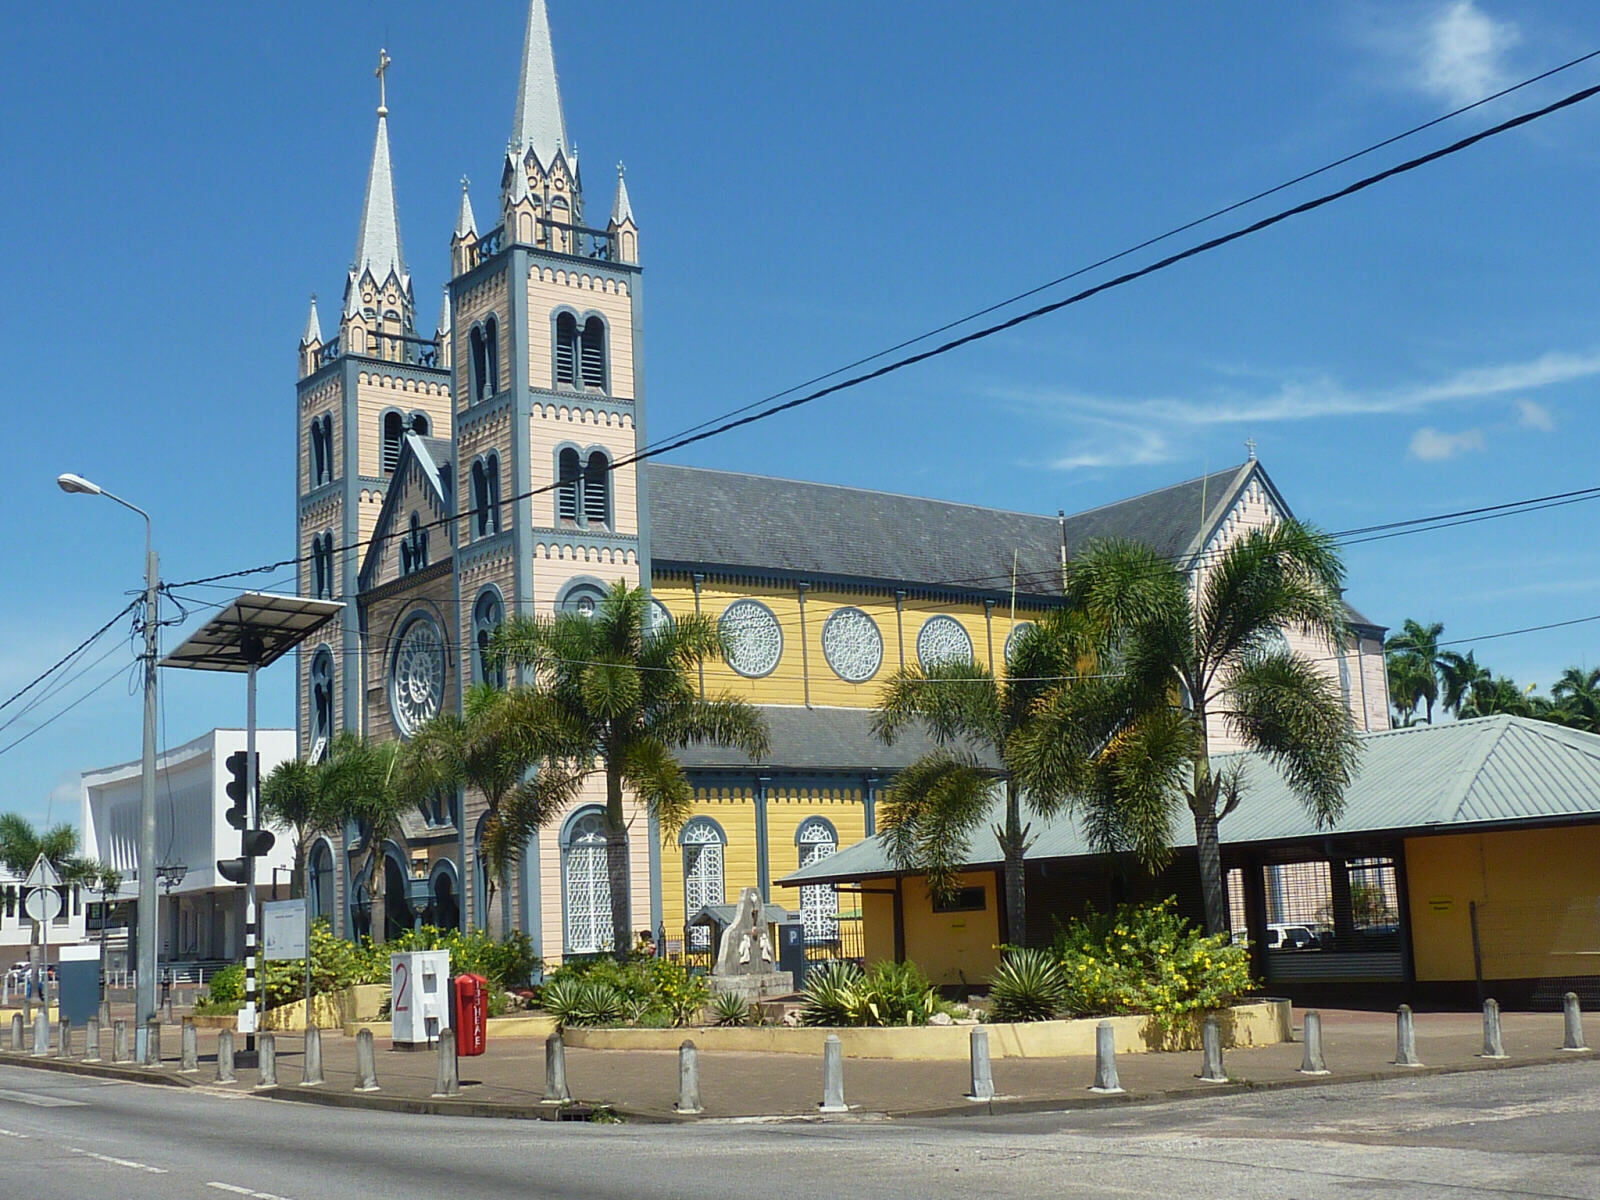 The Cathedral in Gravenstraat, Paramaribo, Suriname